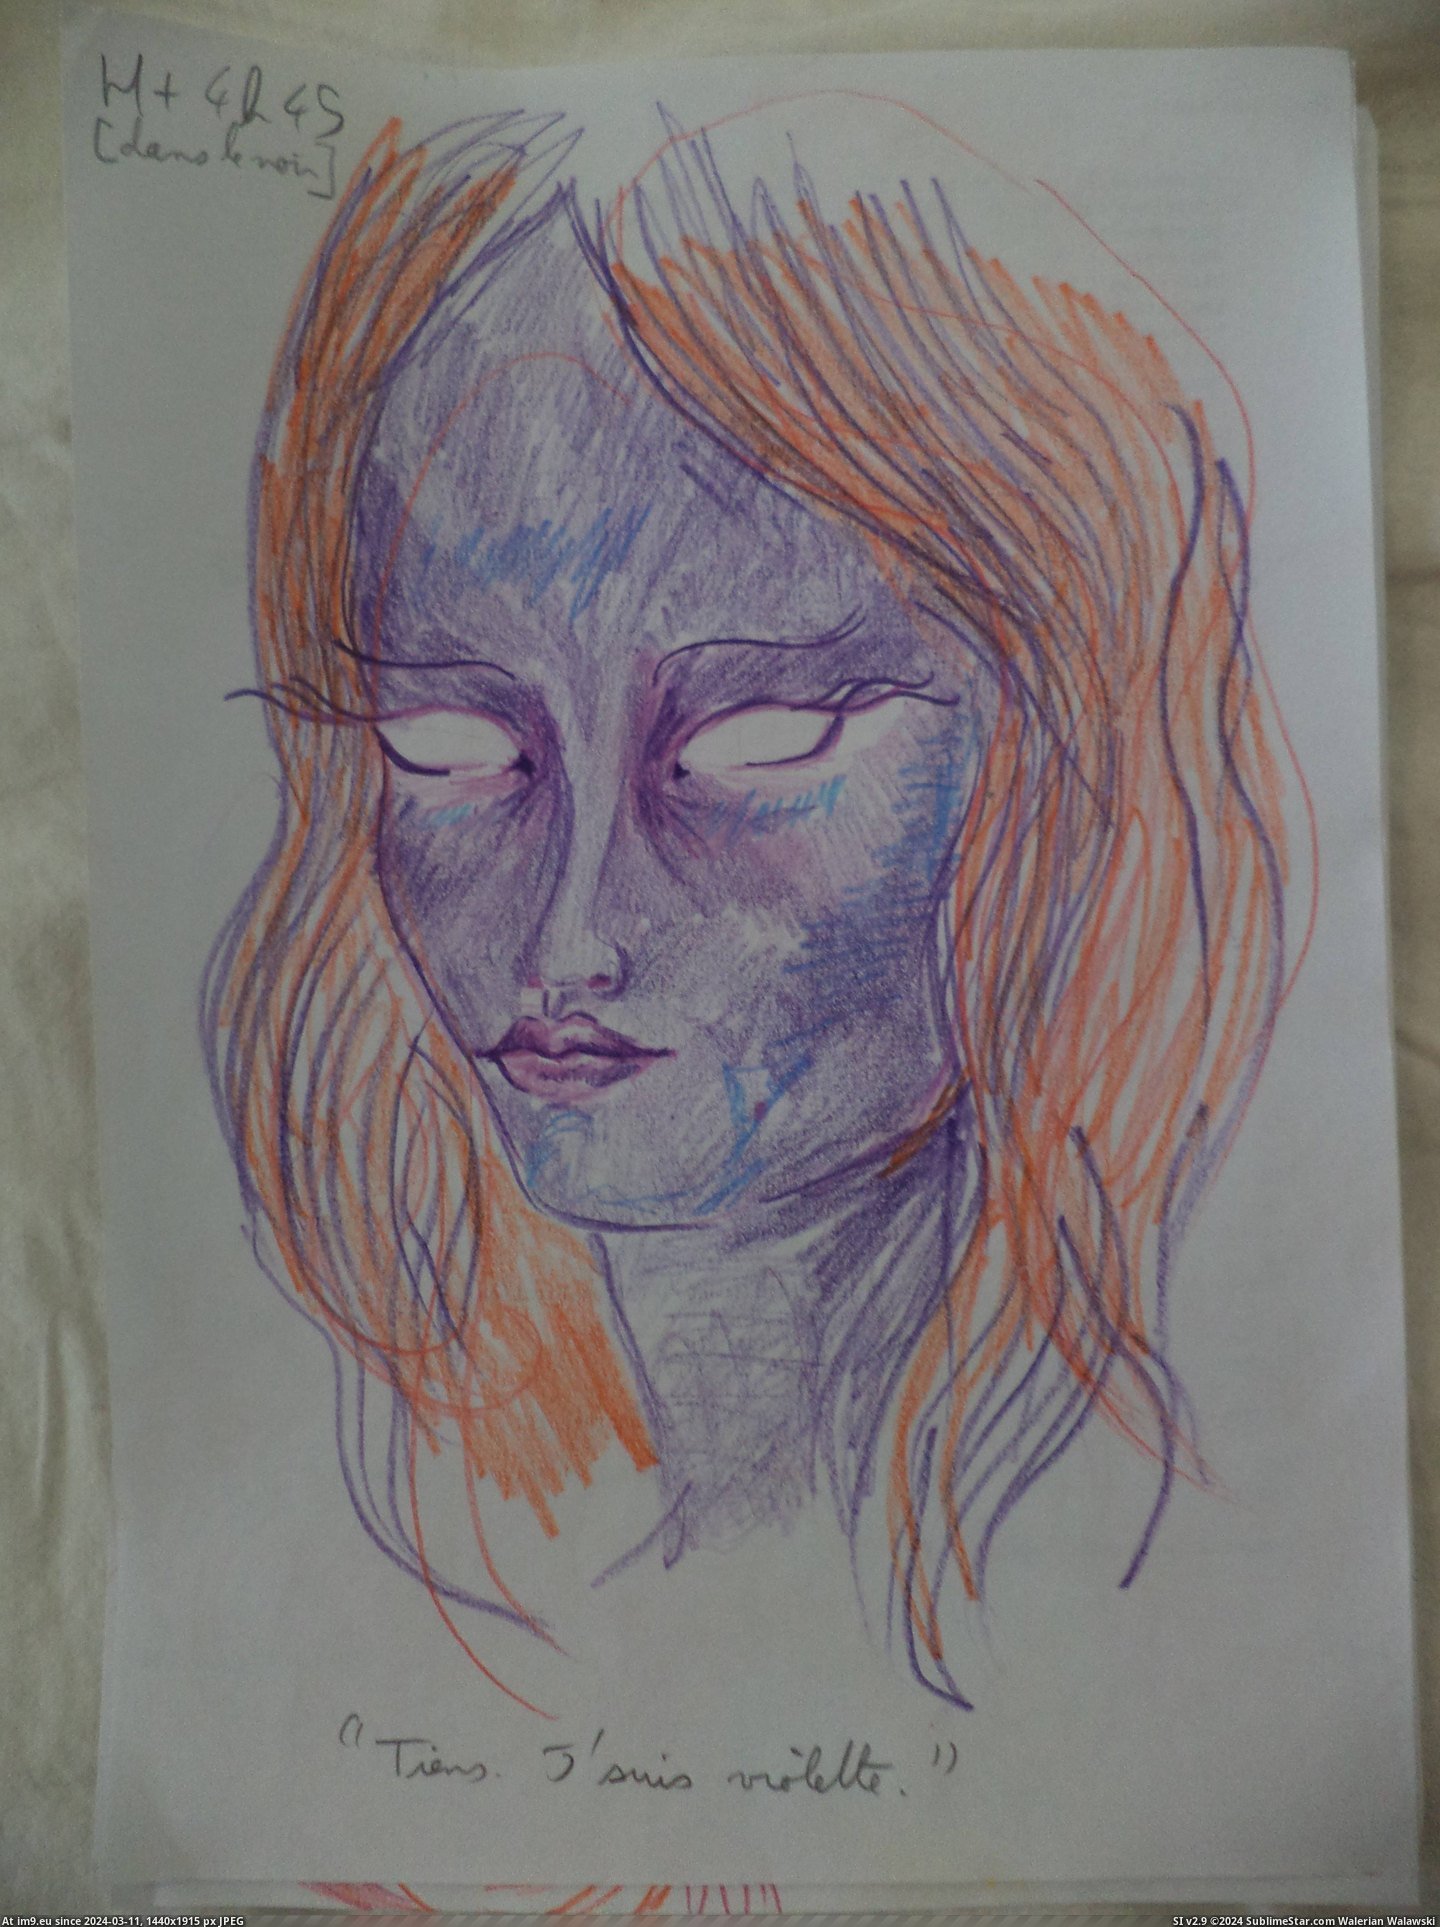 #Time #Friend #Portraits #Lsd #Trip #Drew [Pics] What a LSD trip looks like: a friend of mine drew 11 self-portraits during her first time. 5 Pic. (Изображение из альбом My r/PICS favs))